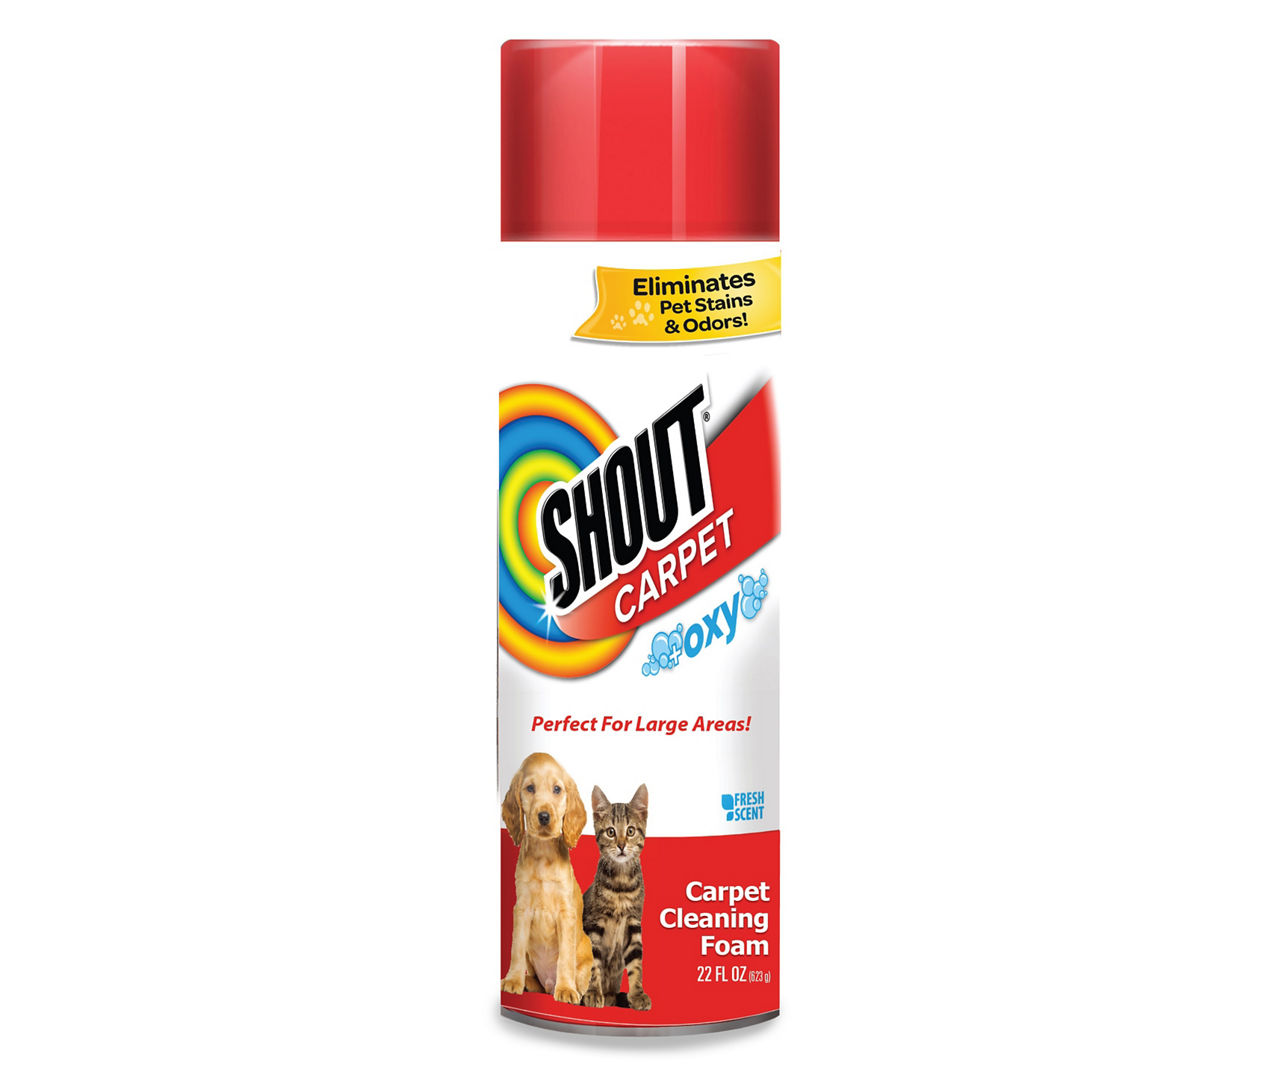 Shout Foam Carpet Cleaner. 2 pack eliminates pet stains & odors. NWT (9)